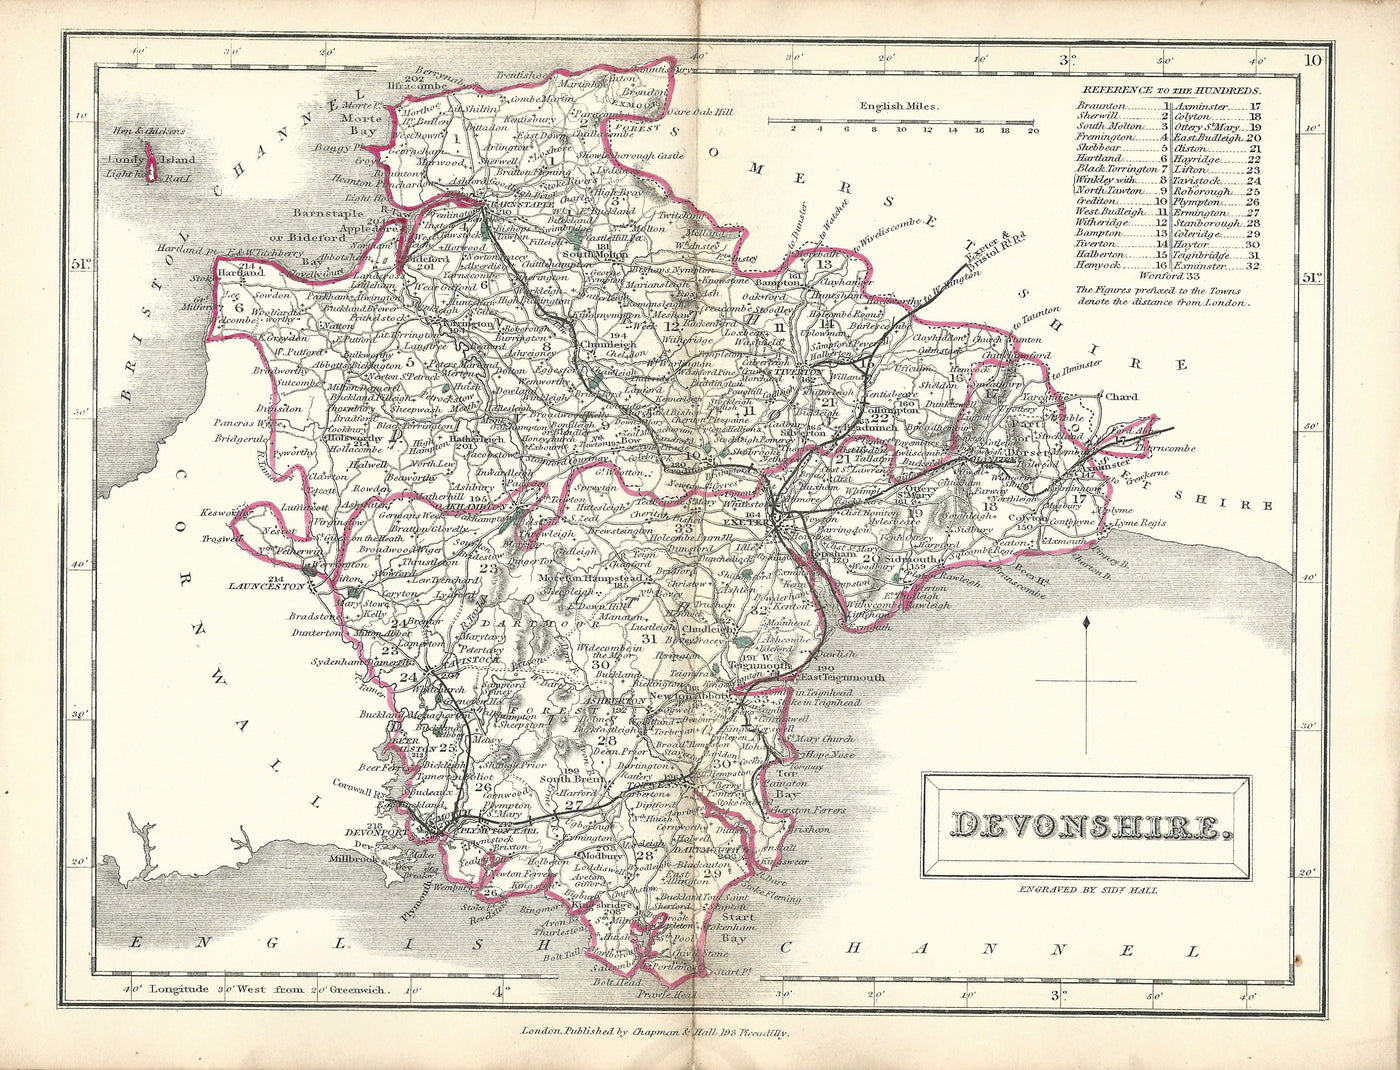 Devon Devonshire antique map from English Counties by Sidney Hall pub. 1860